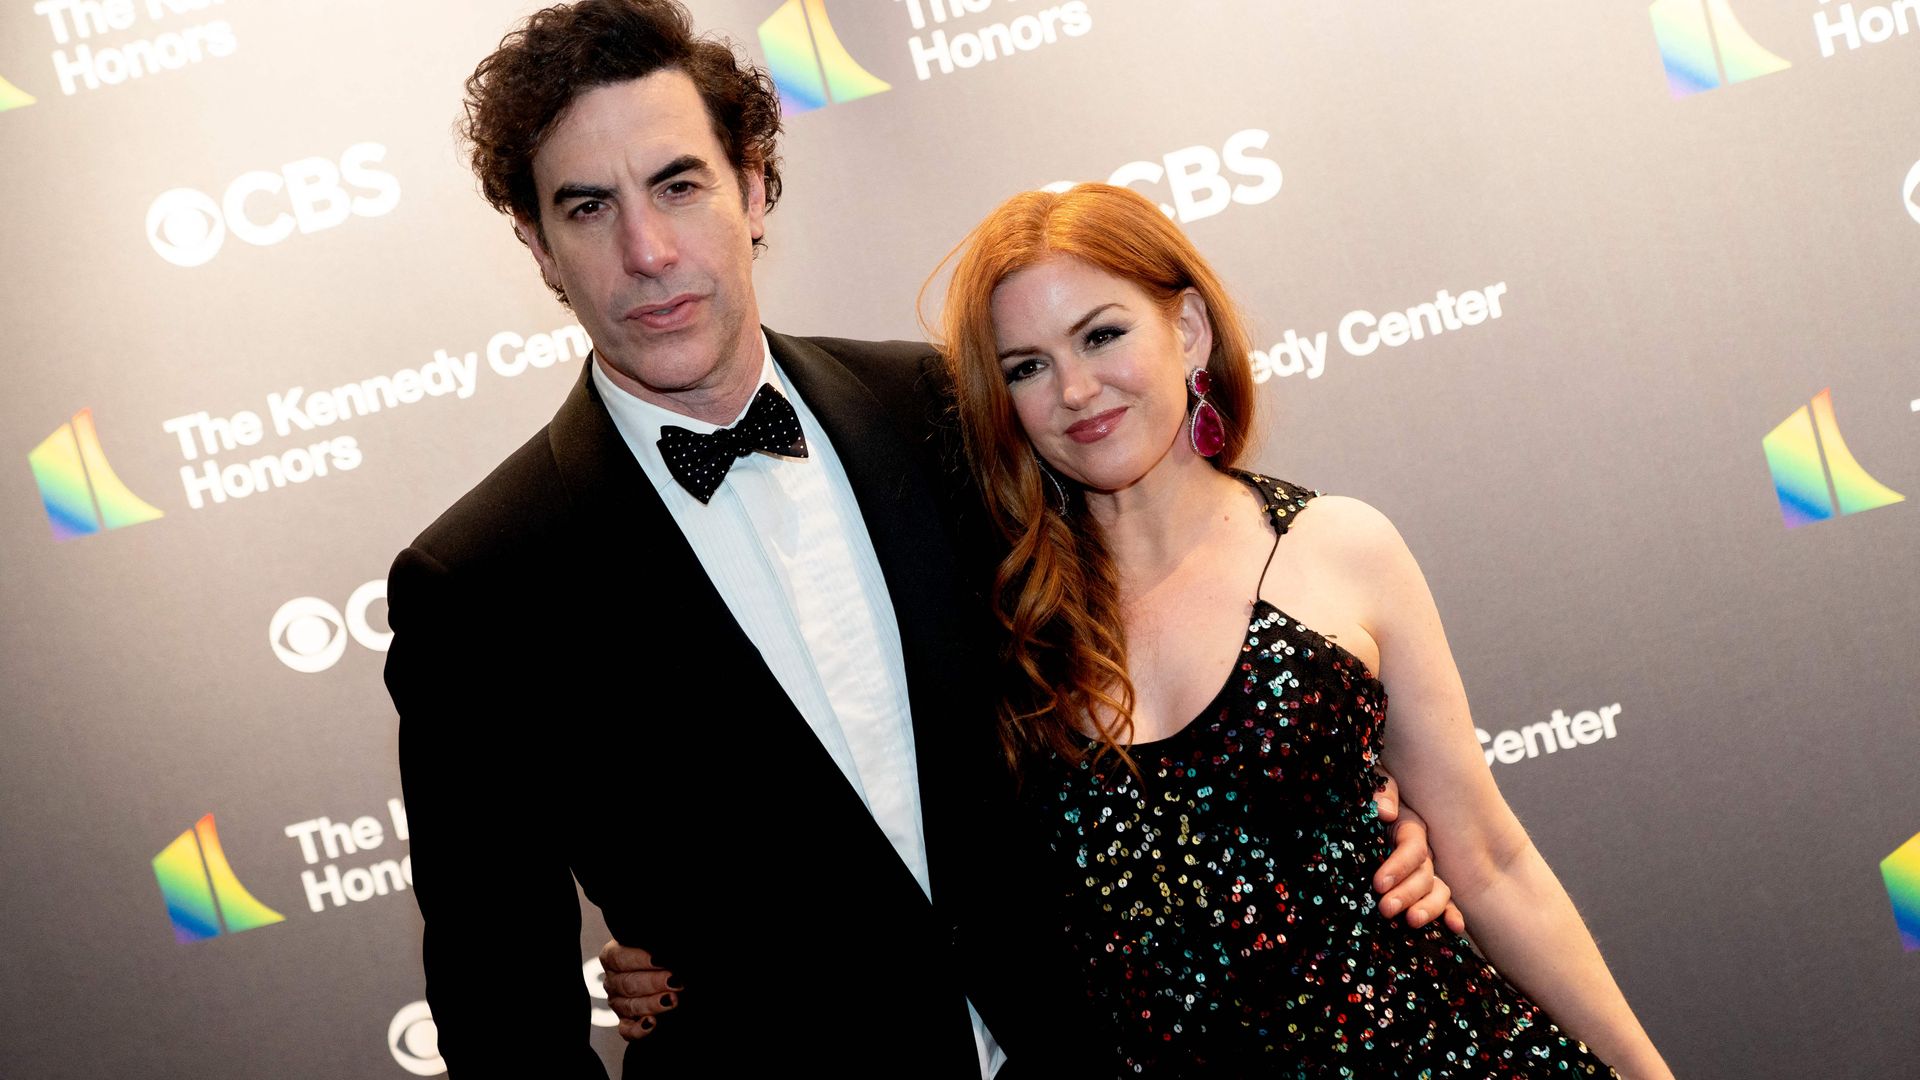 Isla Fisher and Sacha Baron Cohen mark Holocaust Remembrance Day in the most poignant way